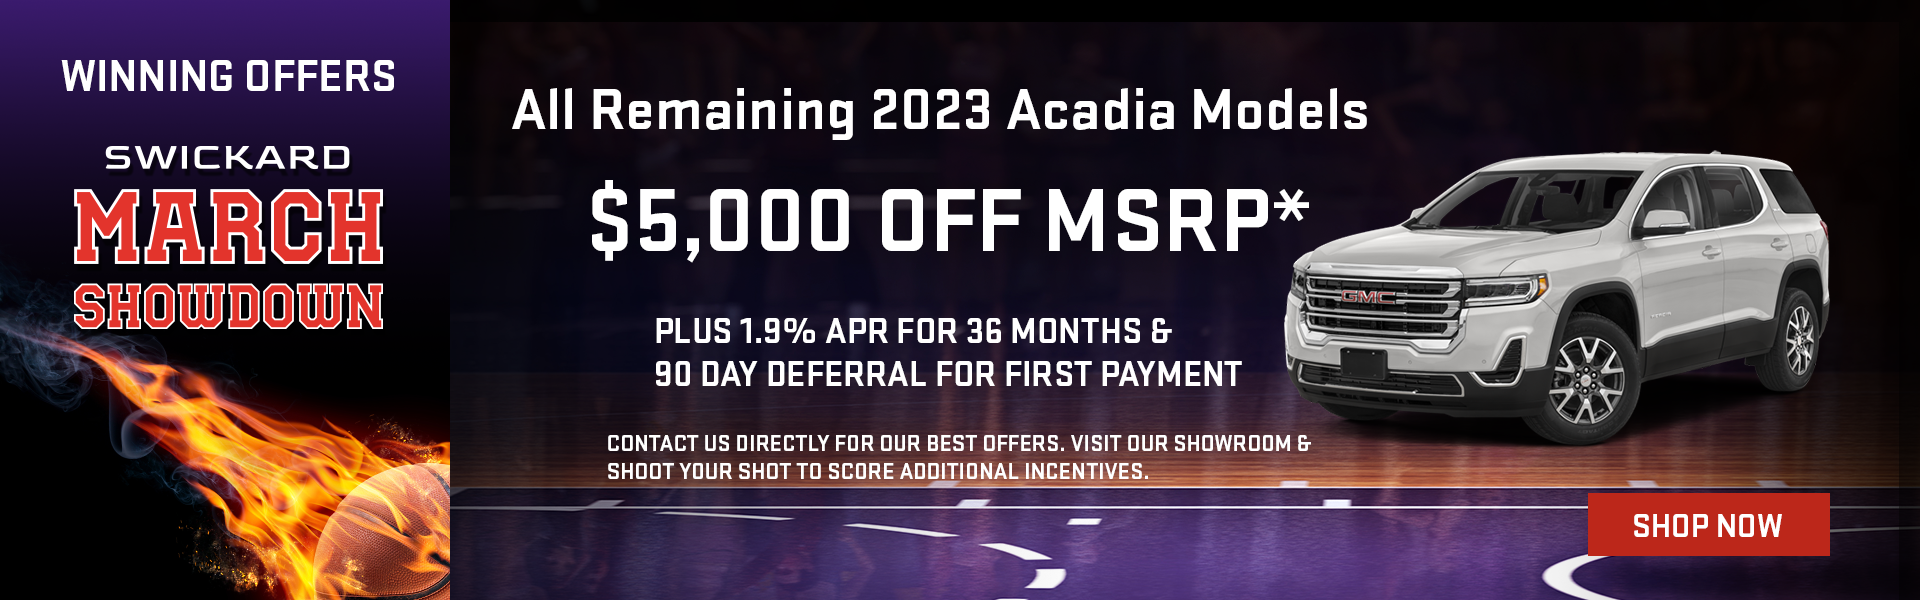 $5,000 off MSRP* All Remaining 2023 GMC Acadia Models